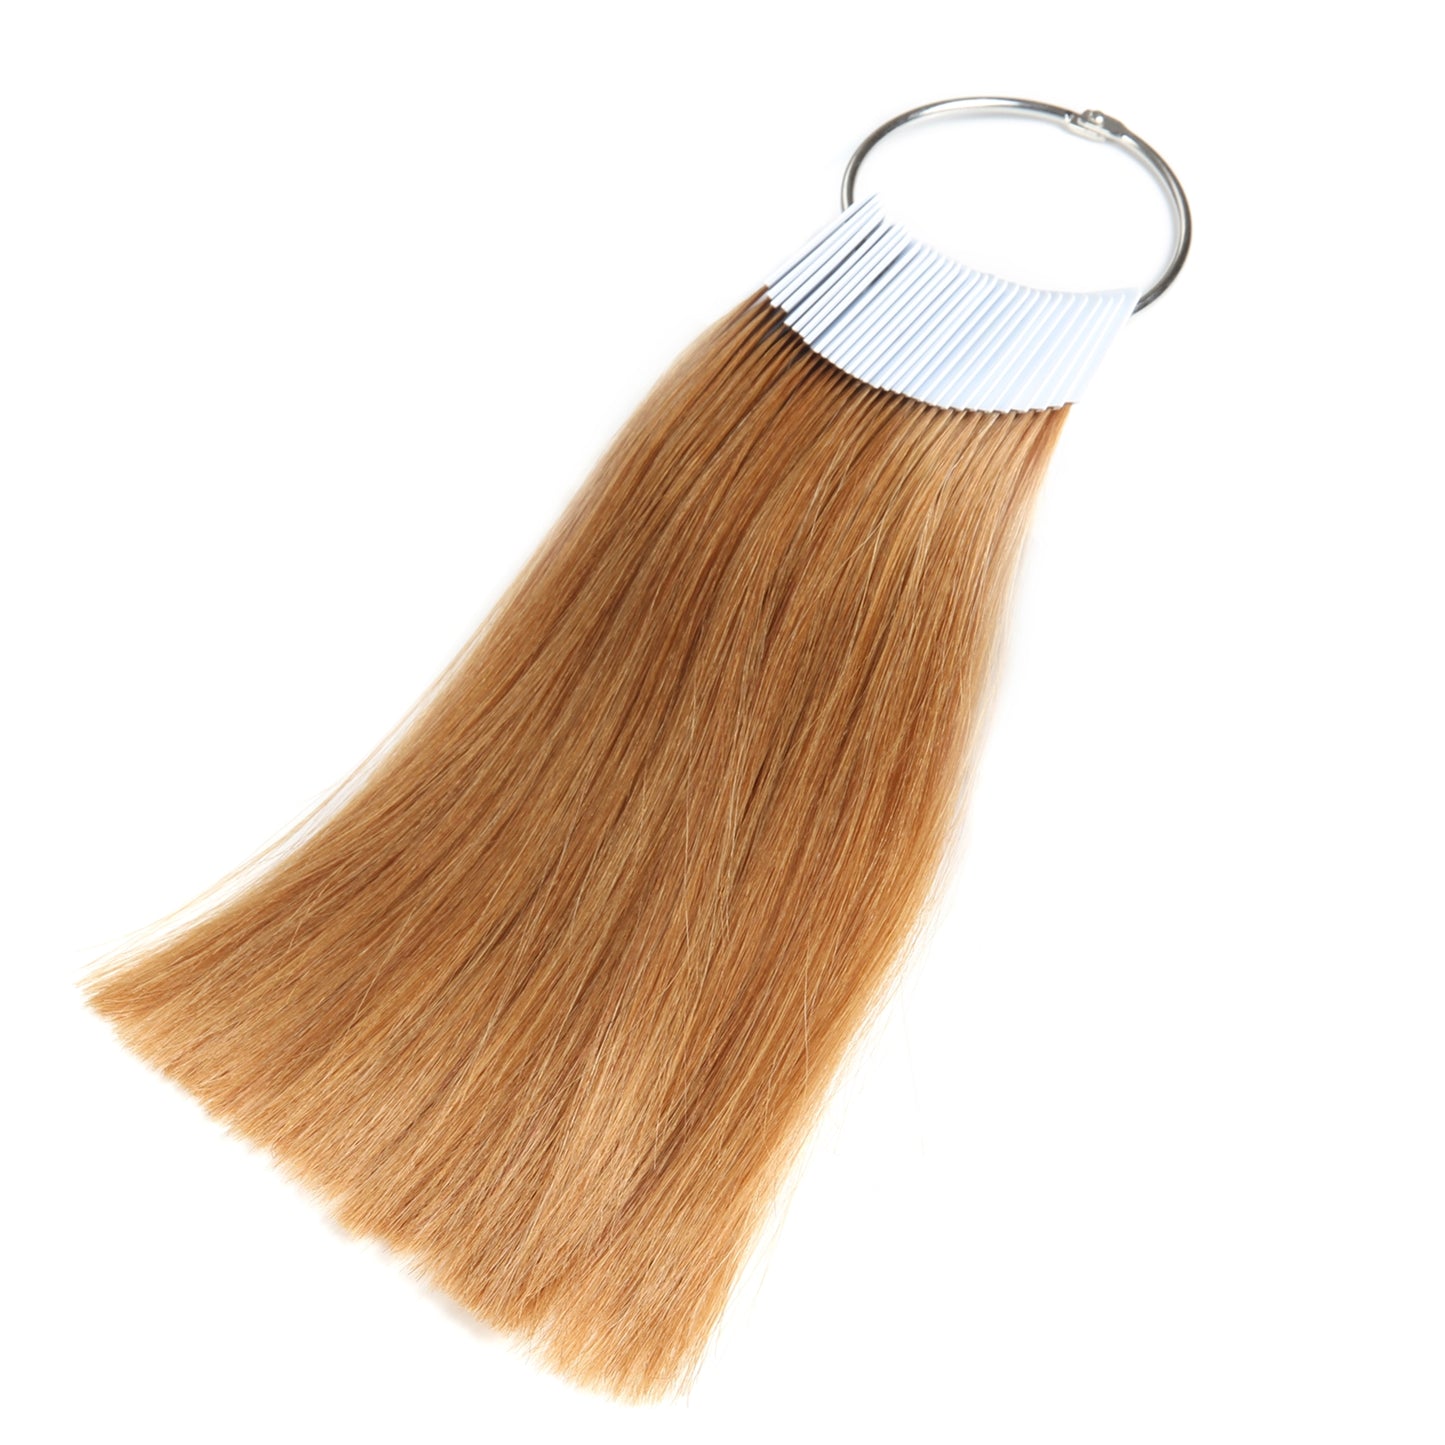 Natural human hair swatches for testing hair colour, 30 strands per pack, 8 Inch